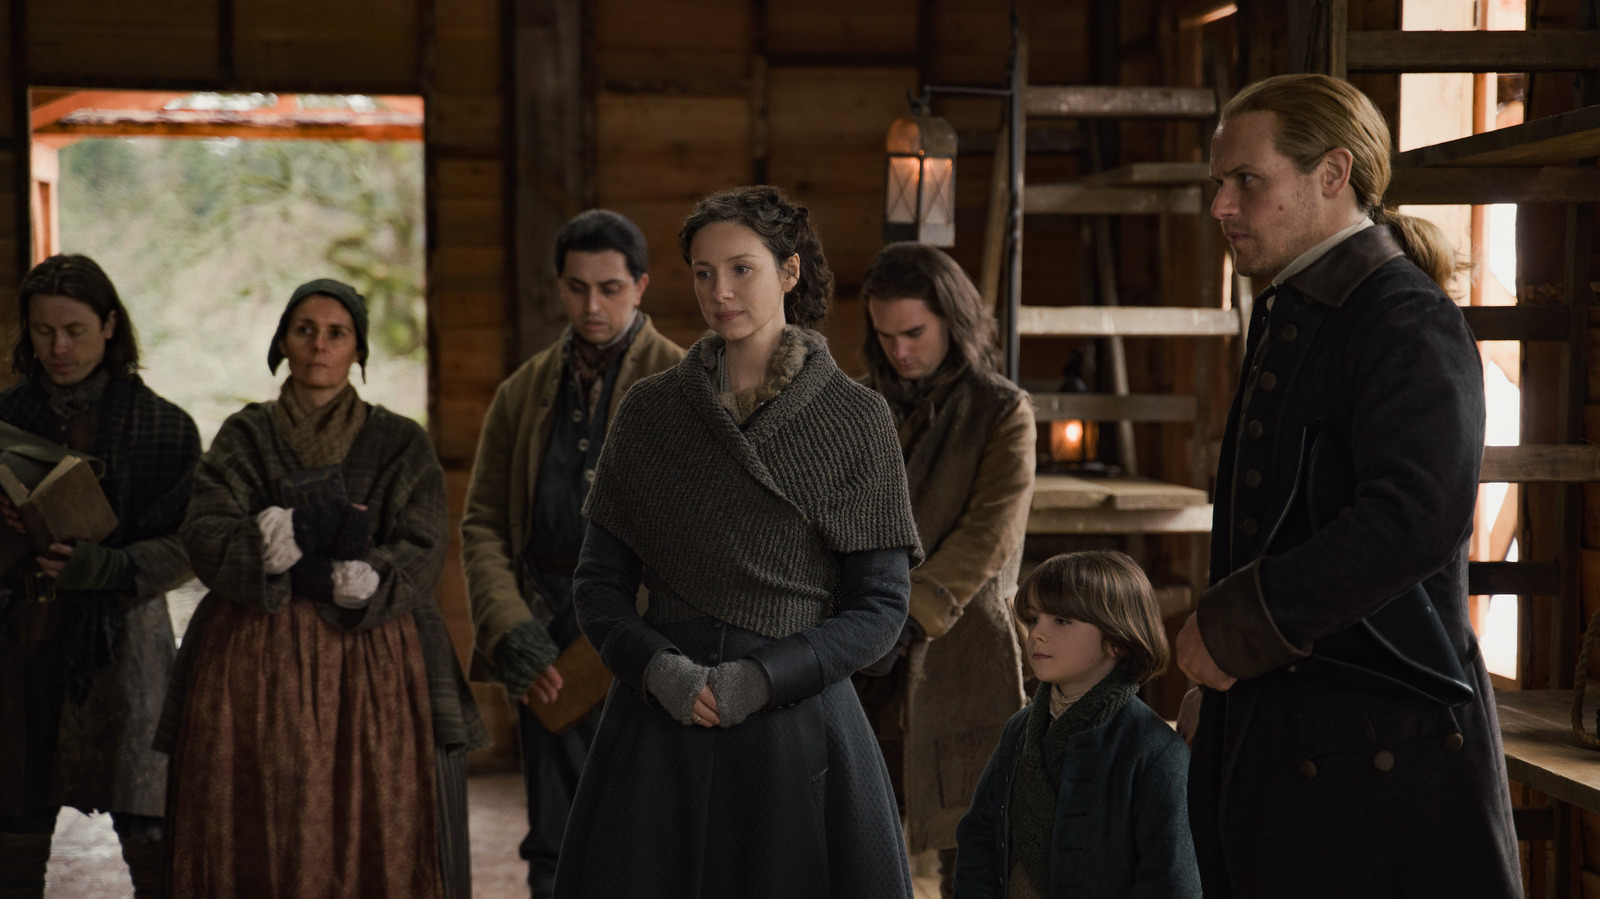 #Outlander’s Latest Episode Tests Allegiances And Tees Up Some Witchery